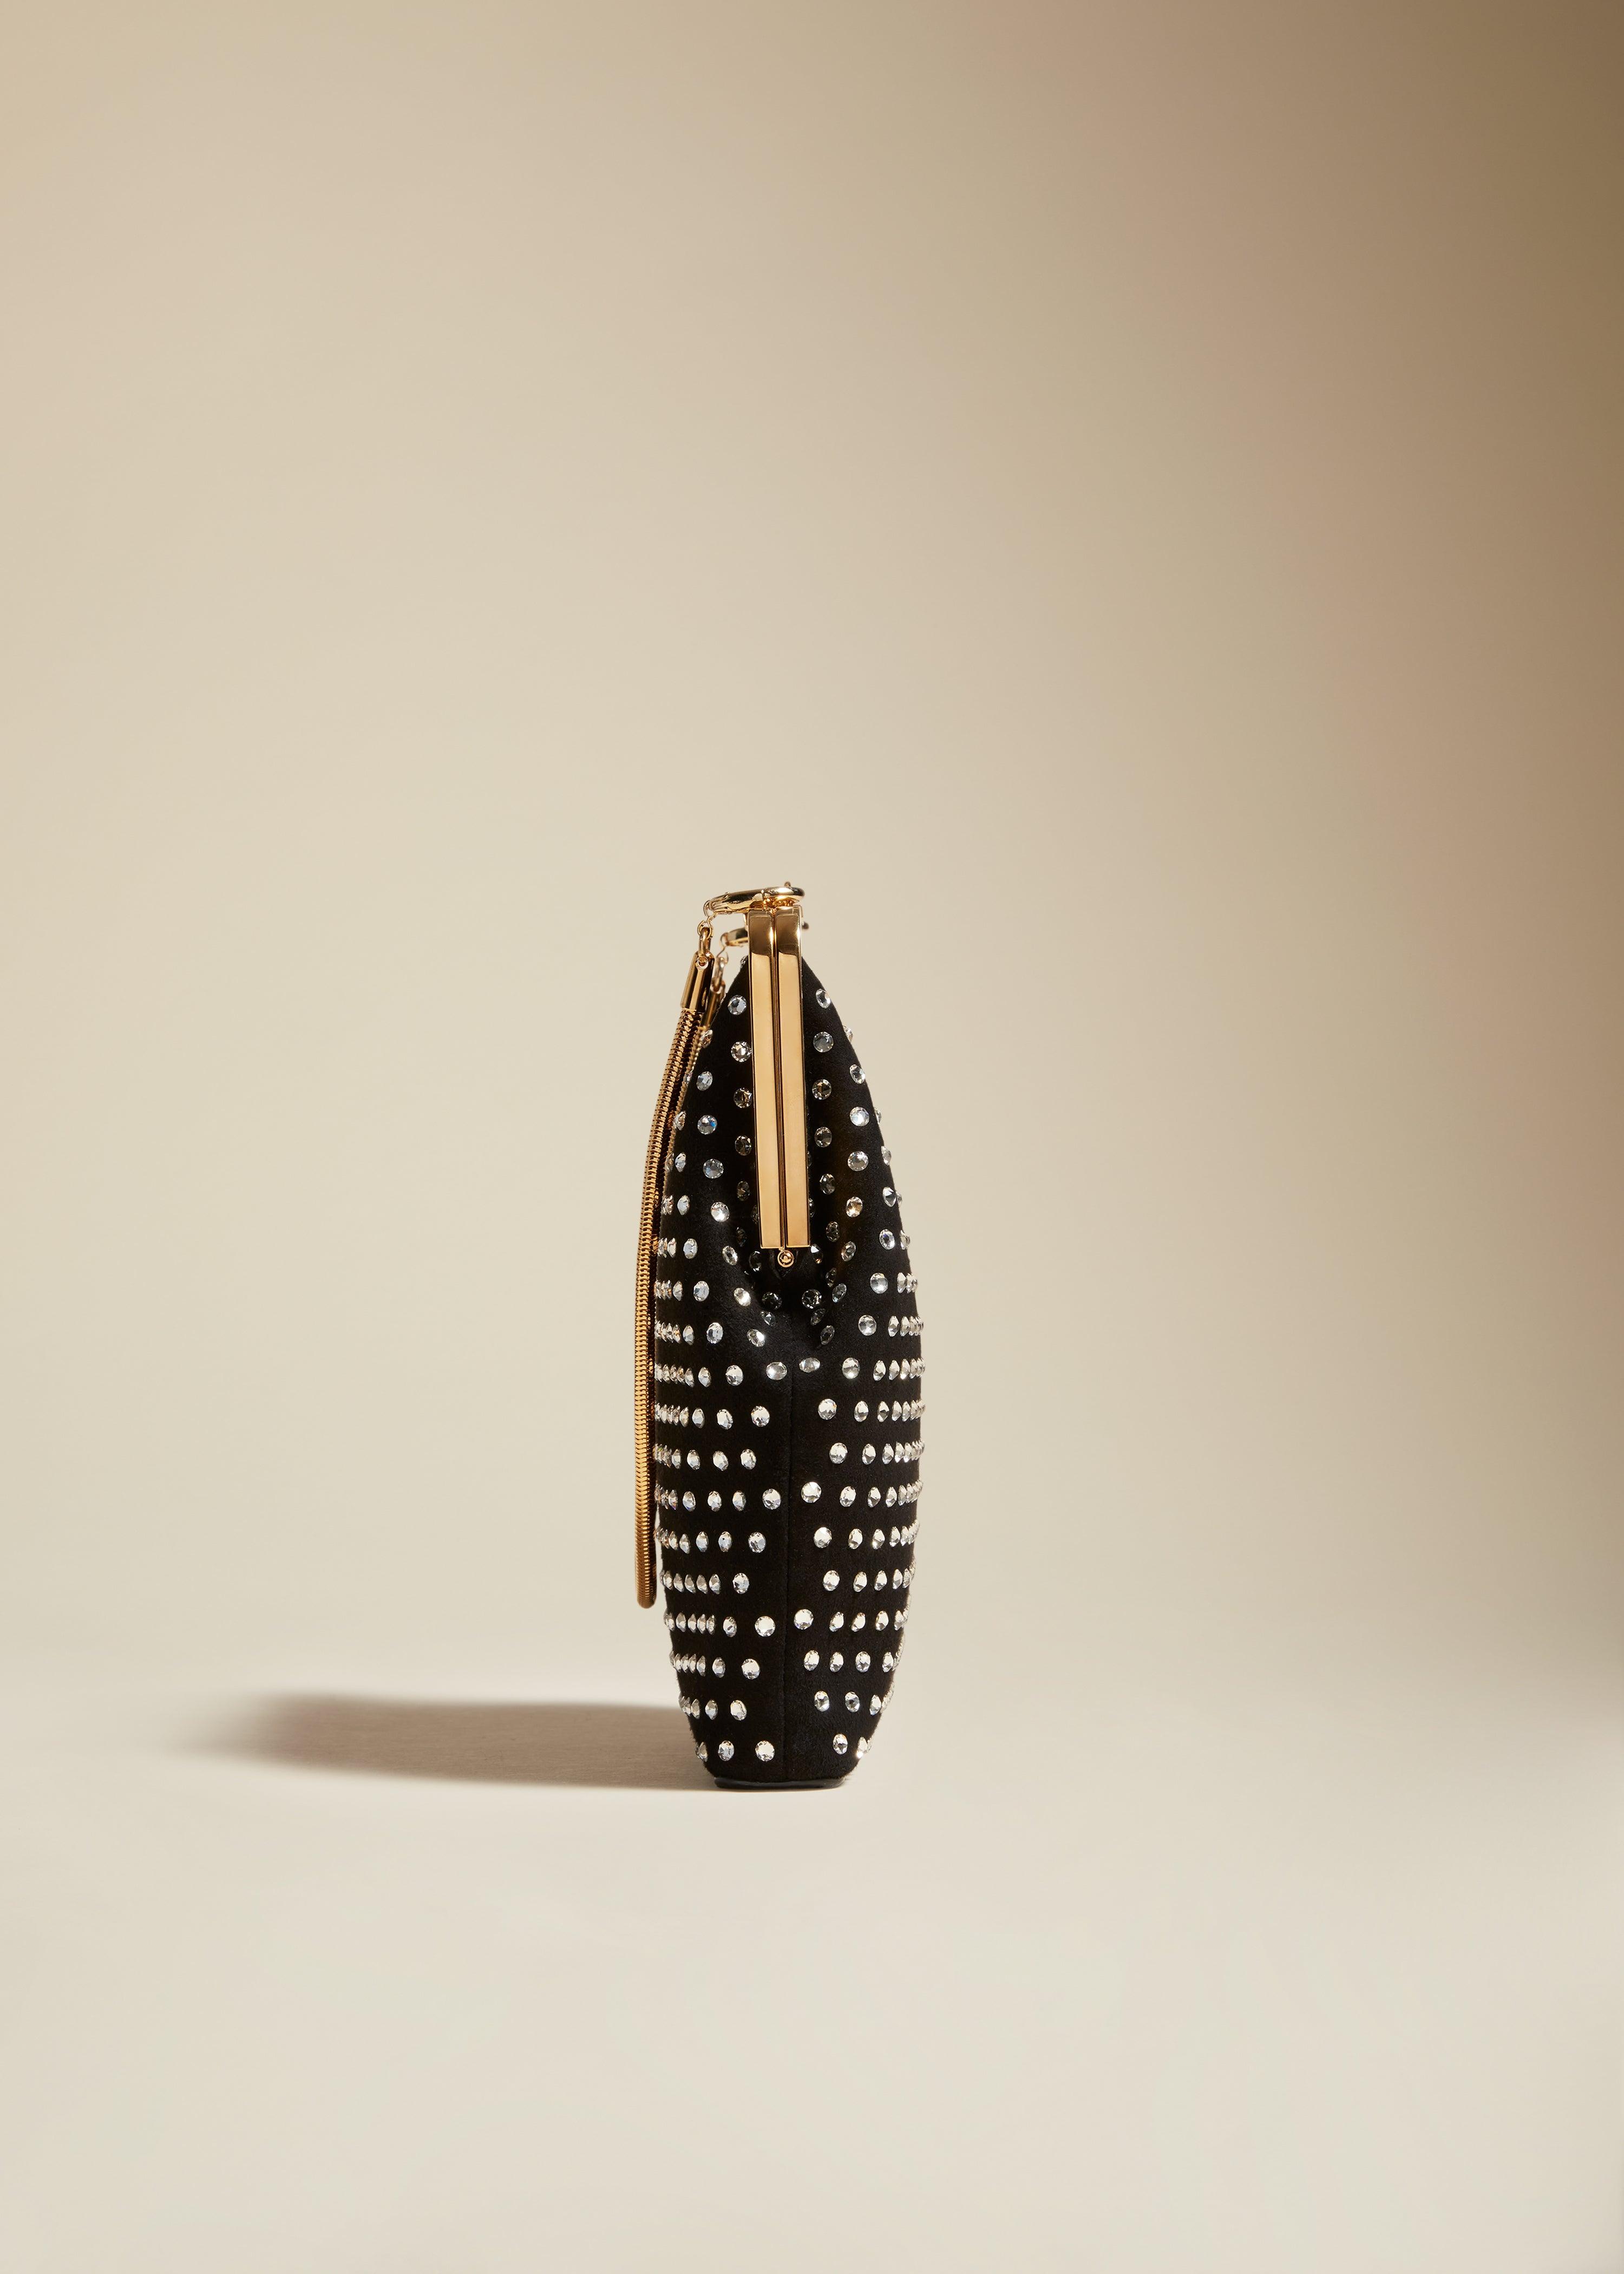 The Lilith Evening Bag in Black with Crystals - The Iconic Issue